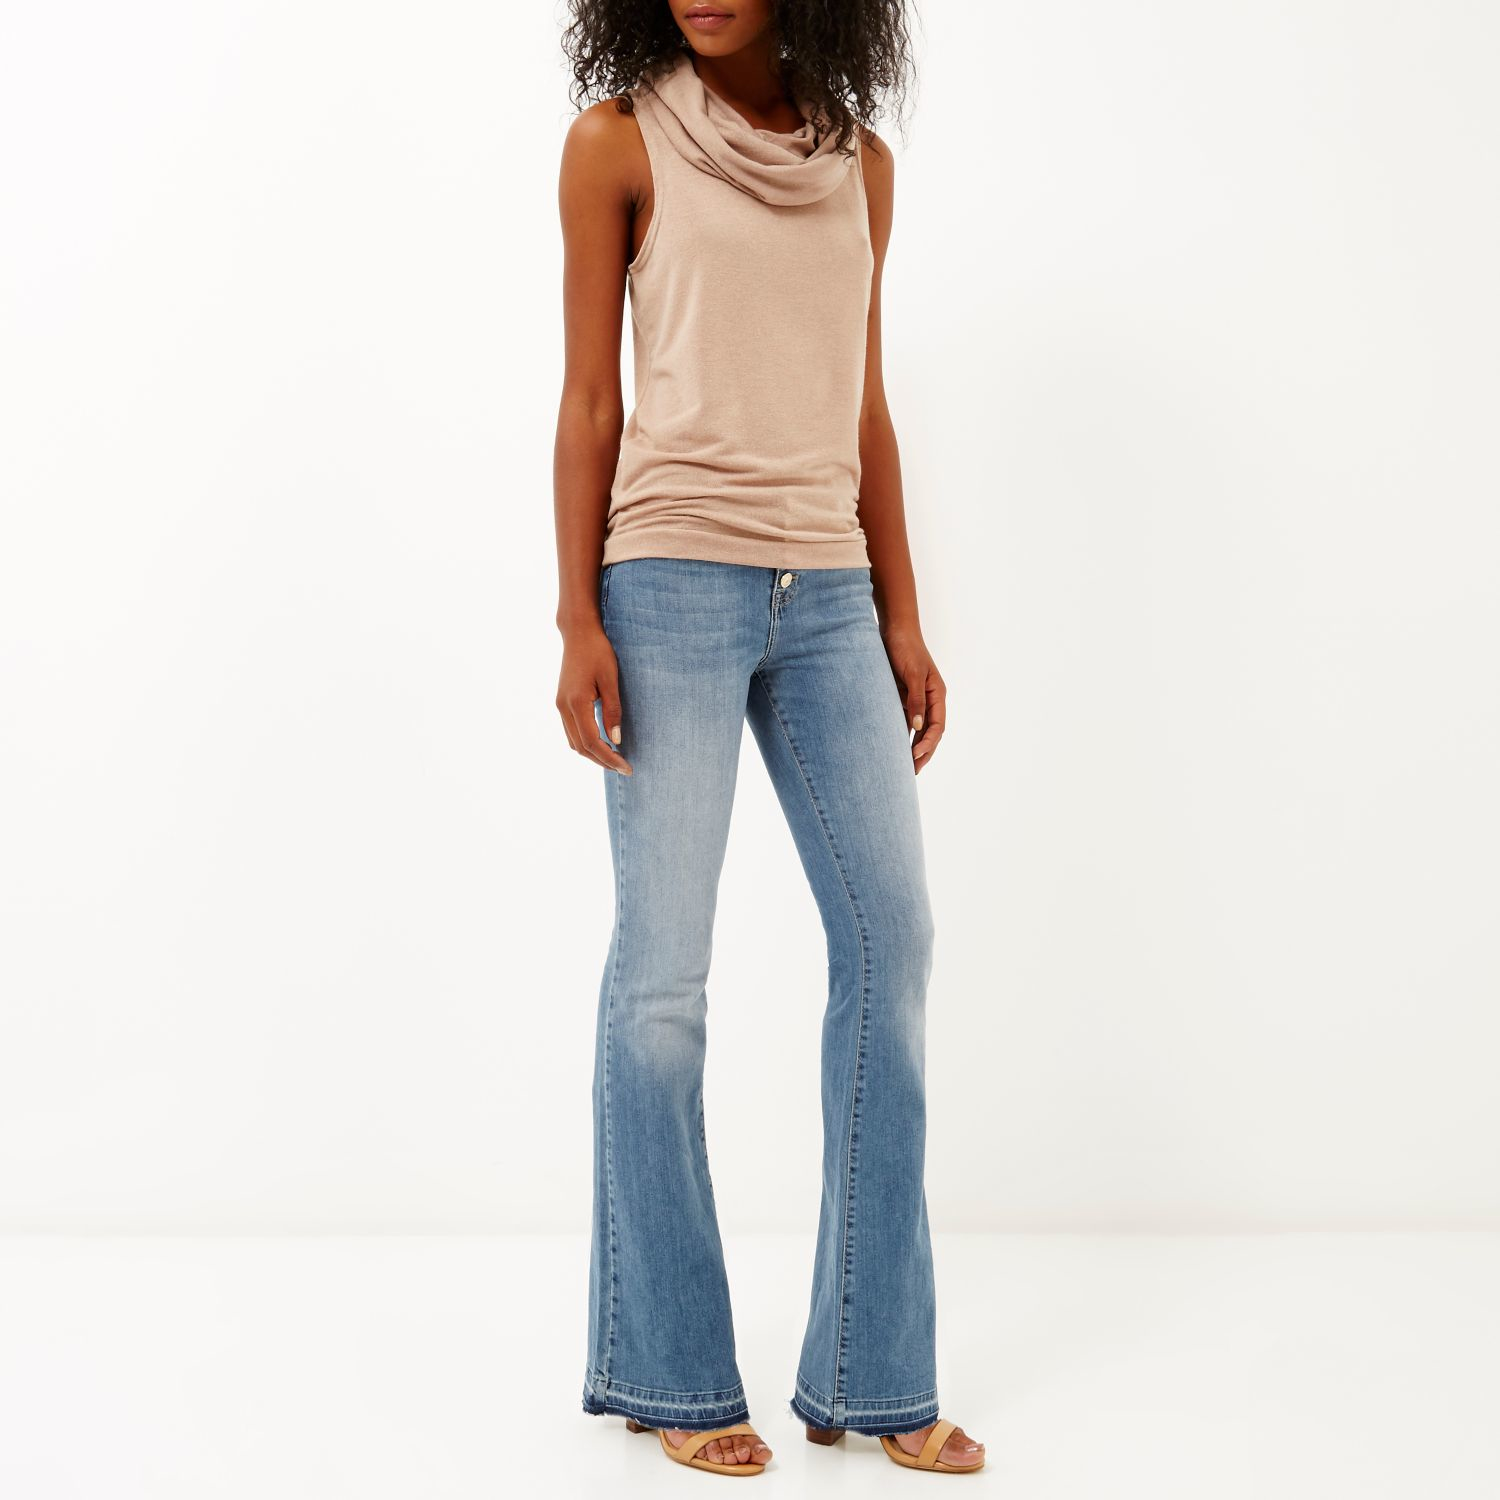 Lyst - River Island Mid Wash Button Up Brooke Flare Jeans in Blue